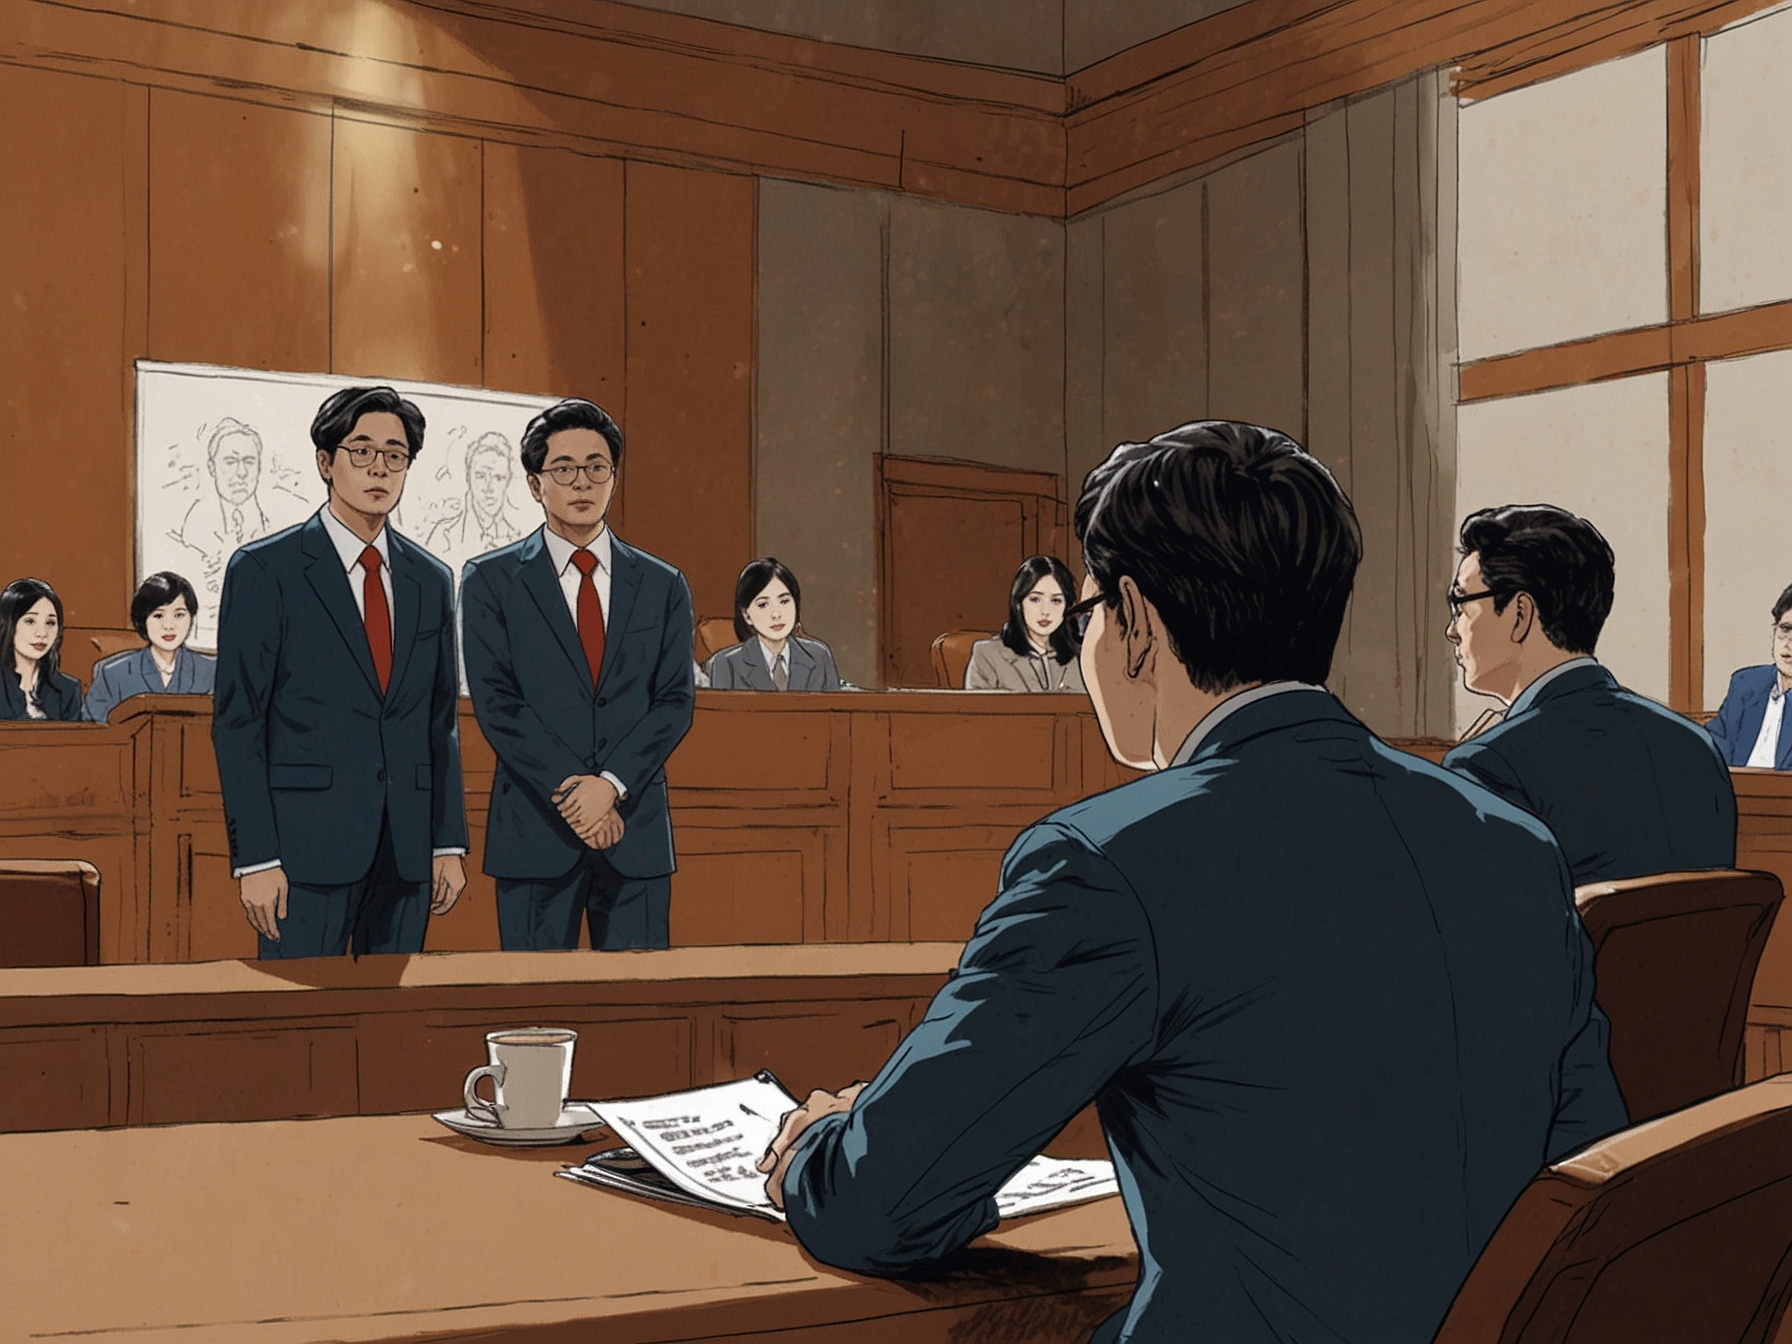 A courtroom scene with legal teams from Attrakt and the former members of Fifty Fifty, Saena, Sio, and Aran, along with The Givers CEO Ahn Sung-il, during the initial hearing.